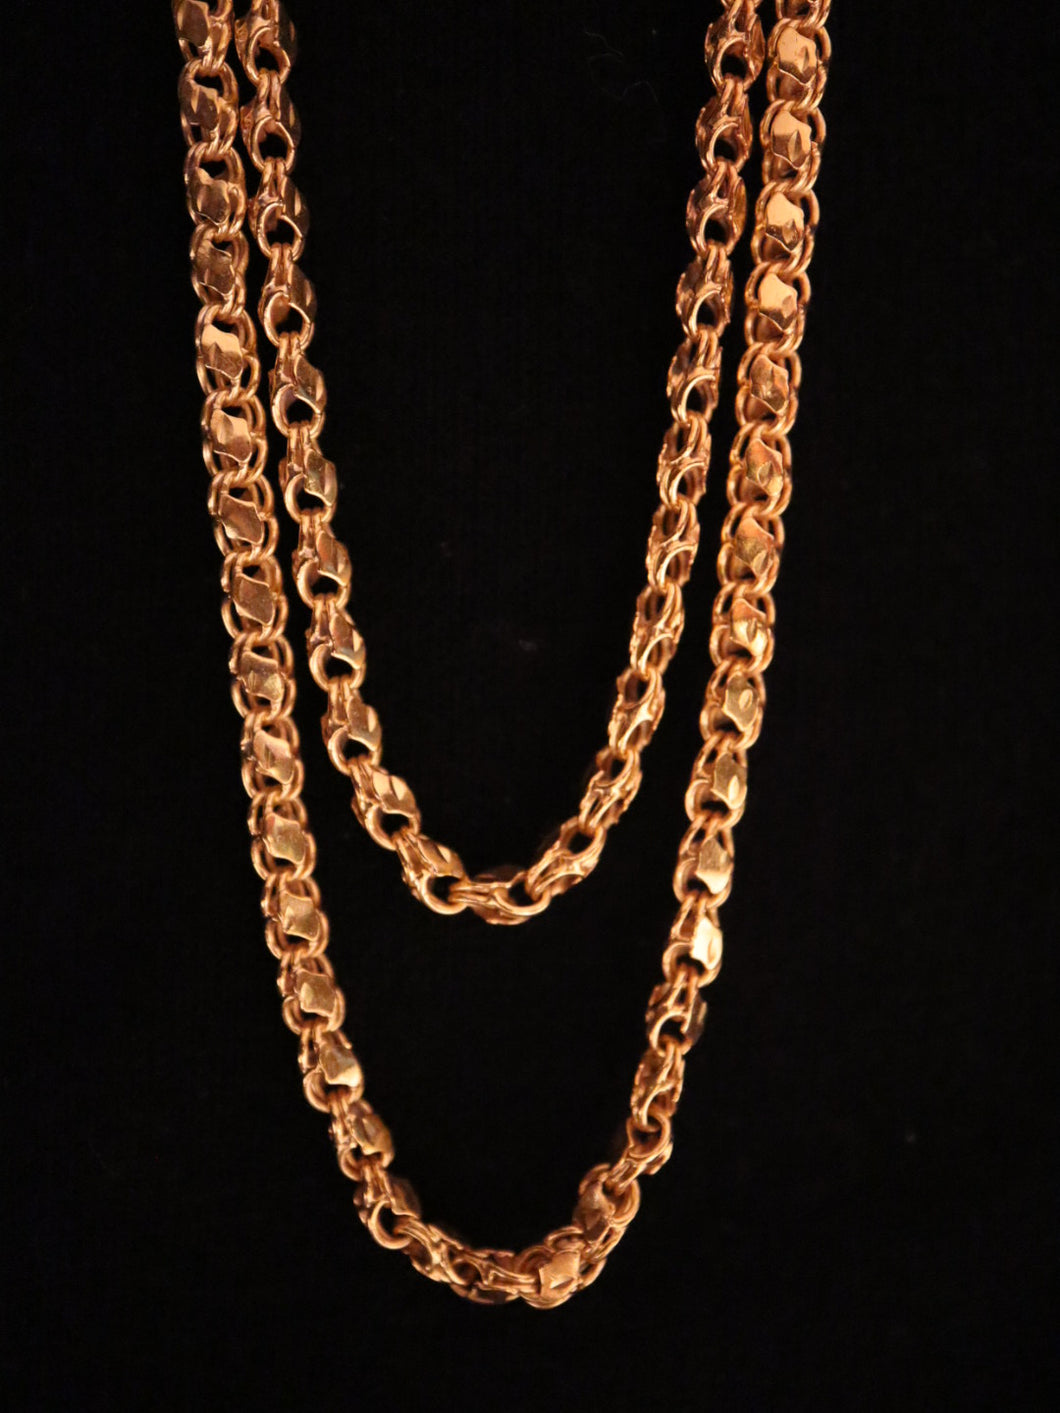 NECKLACE.CABLE CHAIN